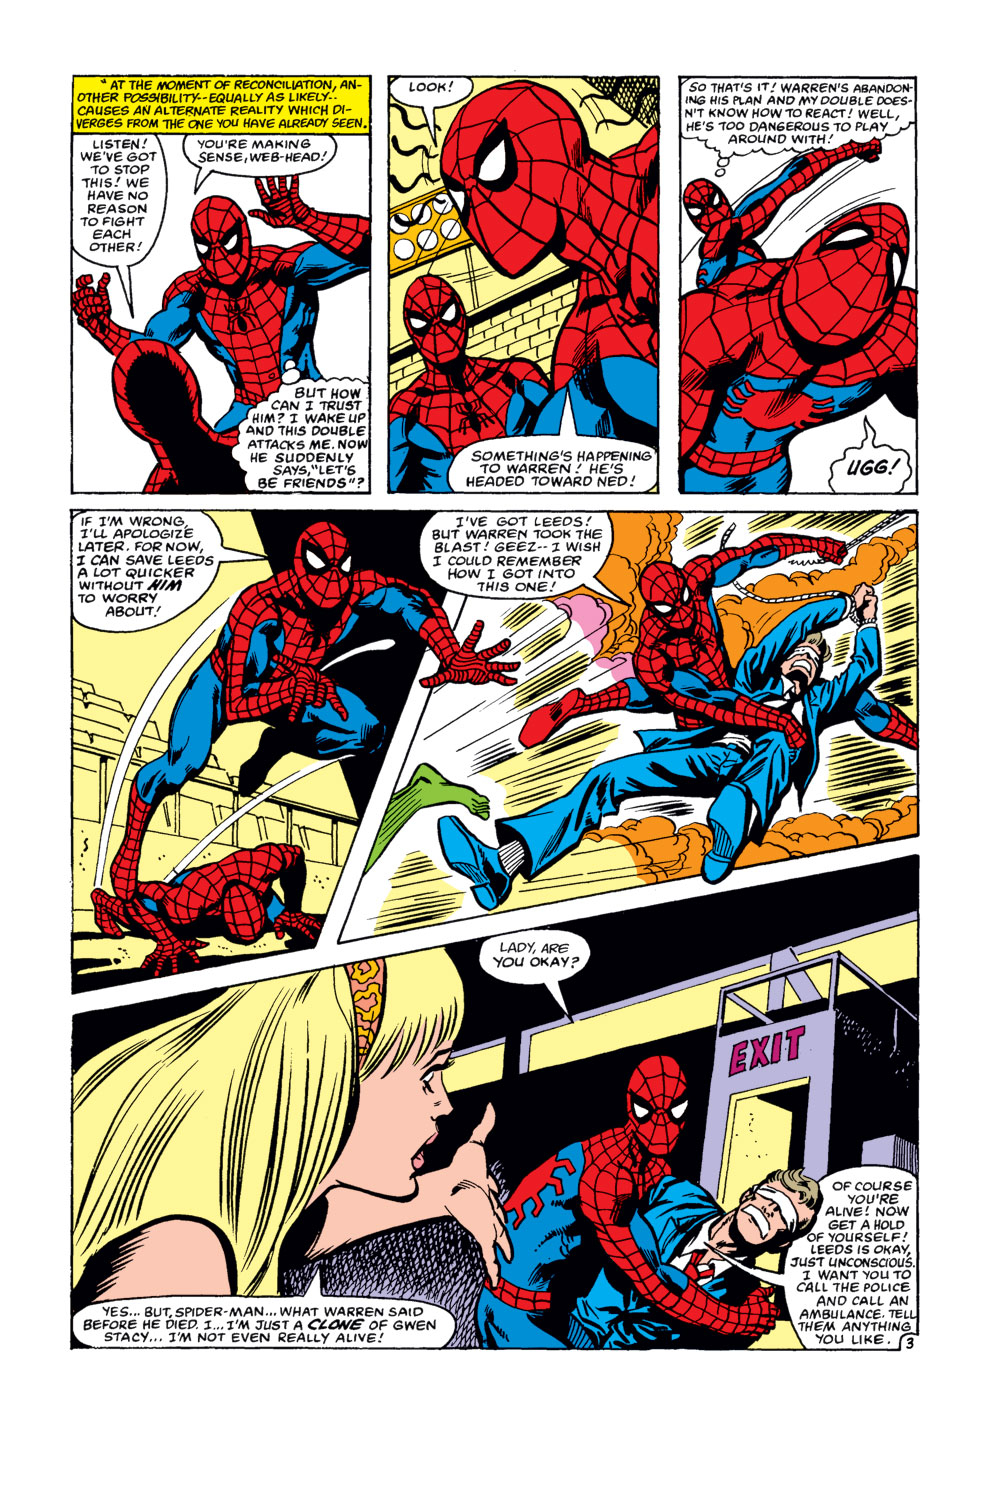 What If? (1977) issue 30 - Spider-Man's clone lived - Page 4